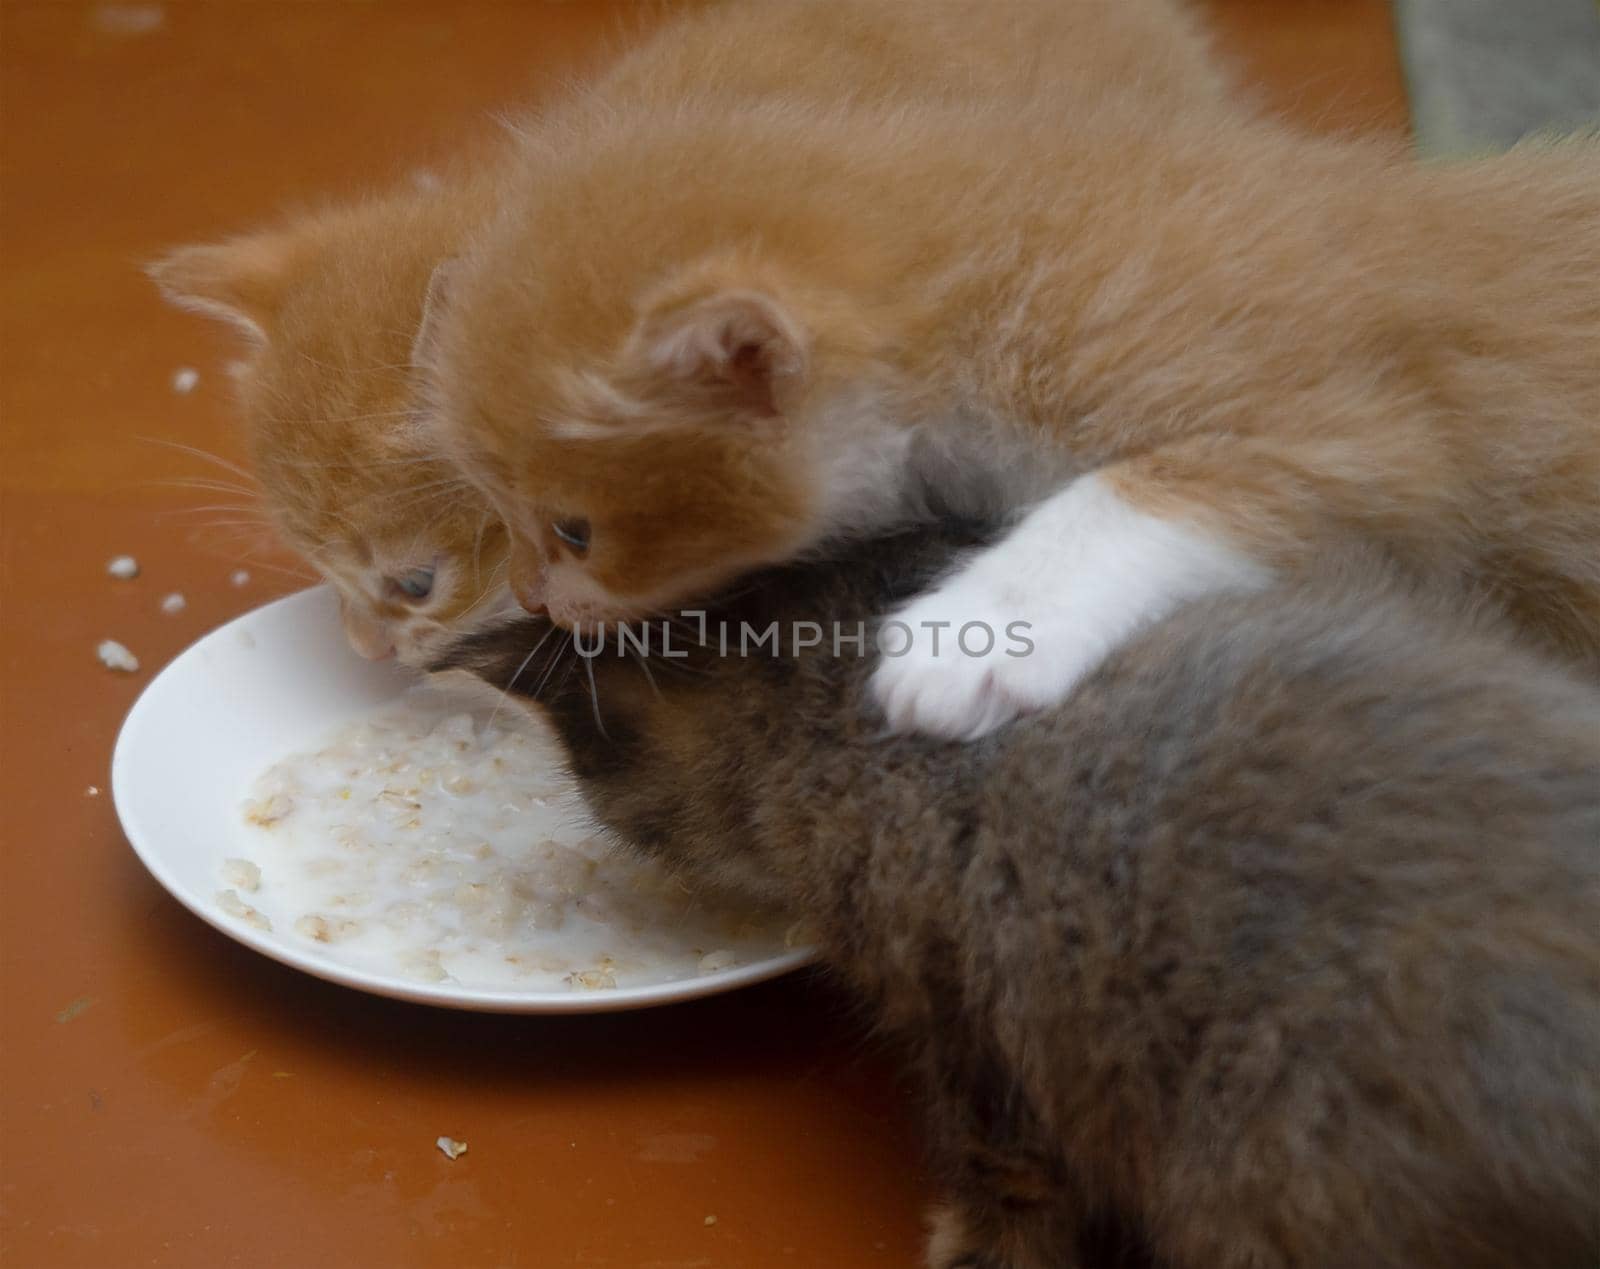 Three kittens eat food from a white plate.